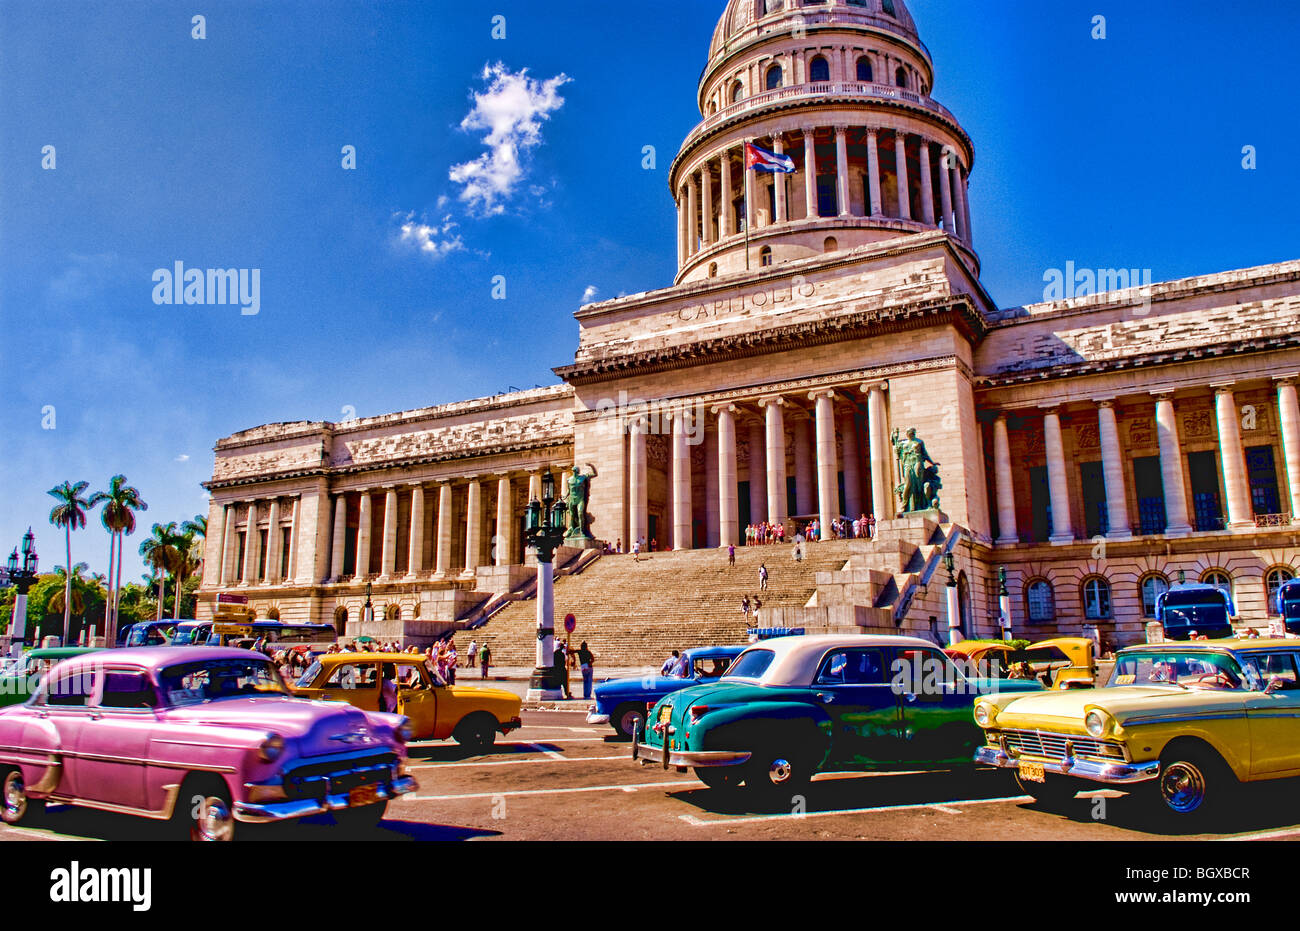 Old American classic cars in central Havana Cuba near Capitol showing old 50s autos days Stock Photo